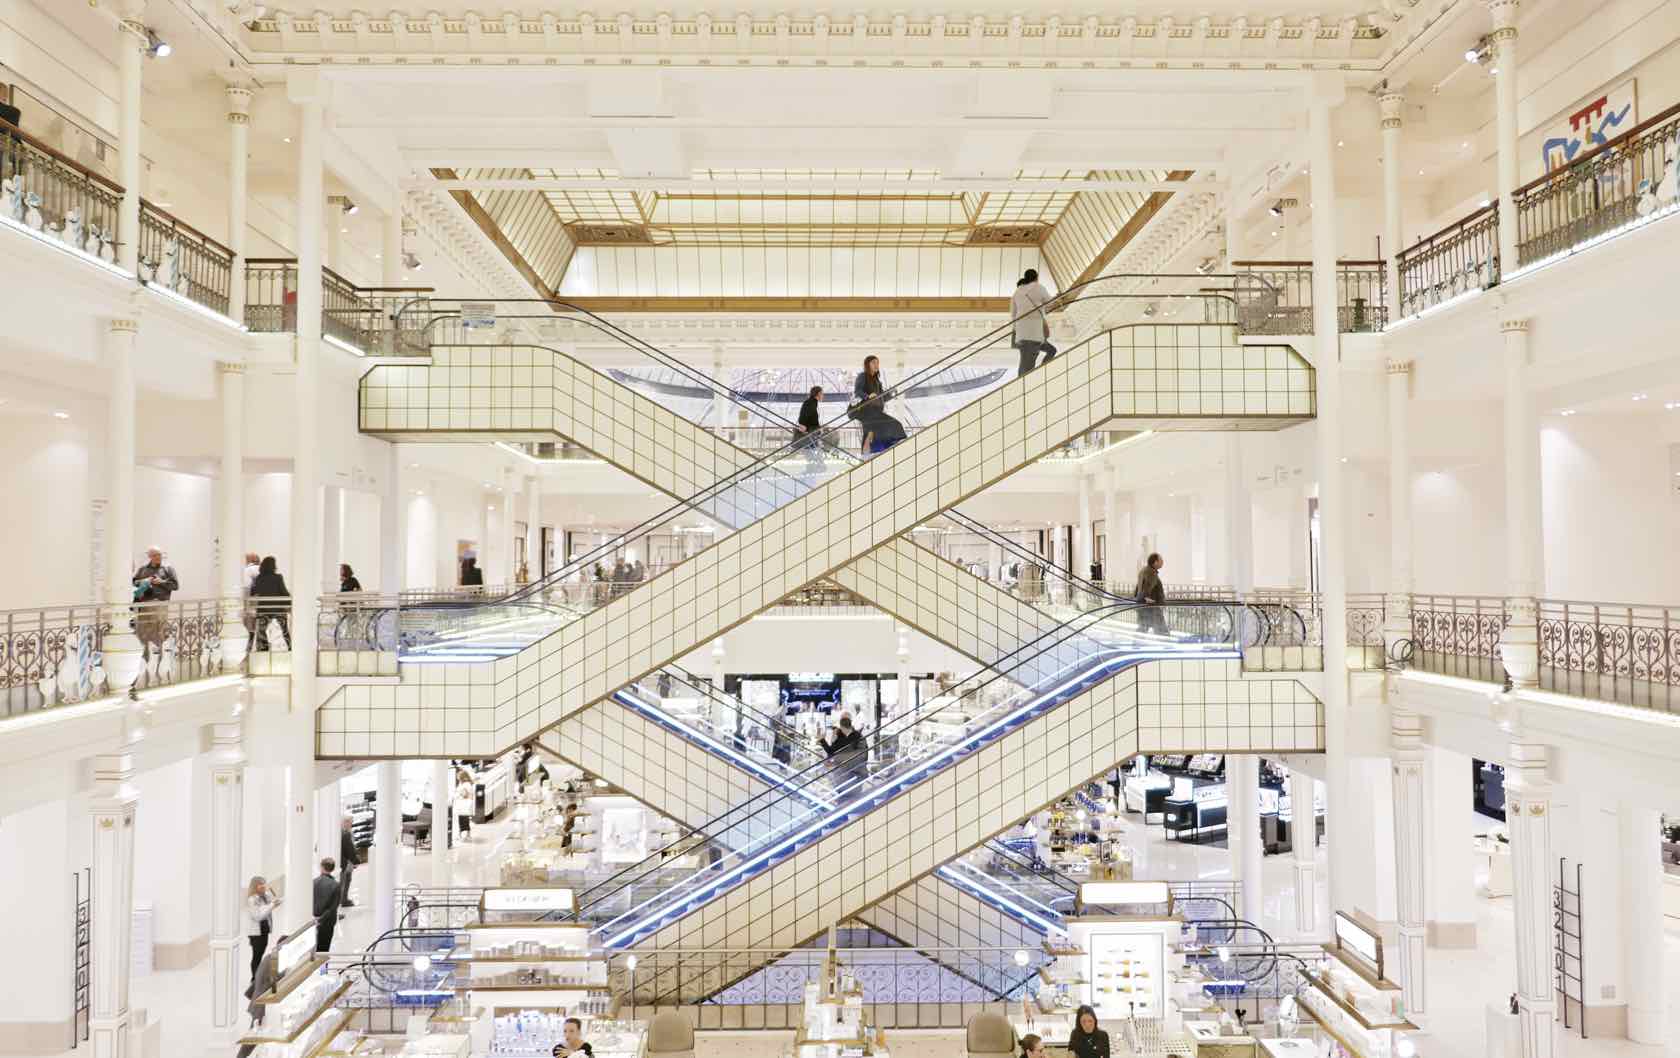 The Ultimate Shopping Guide to Le Bon Marché in Paris